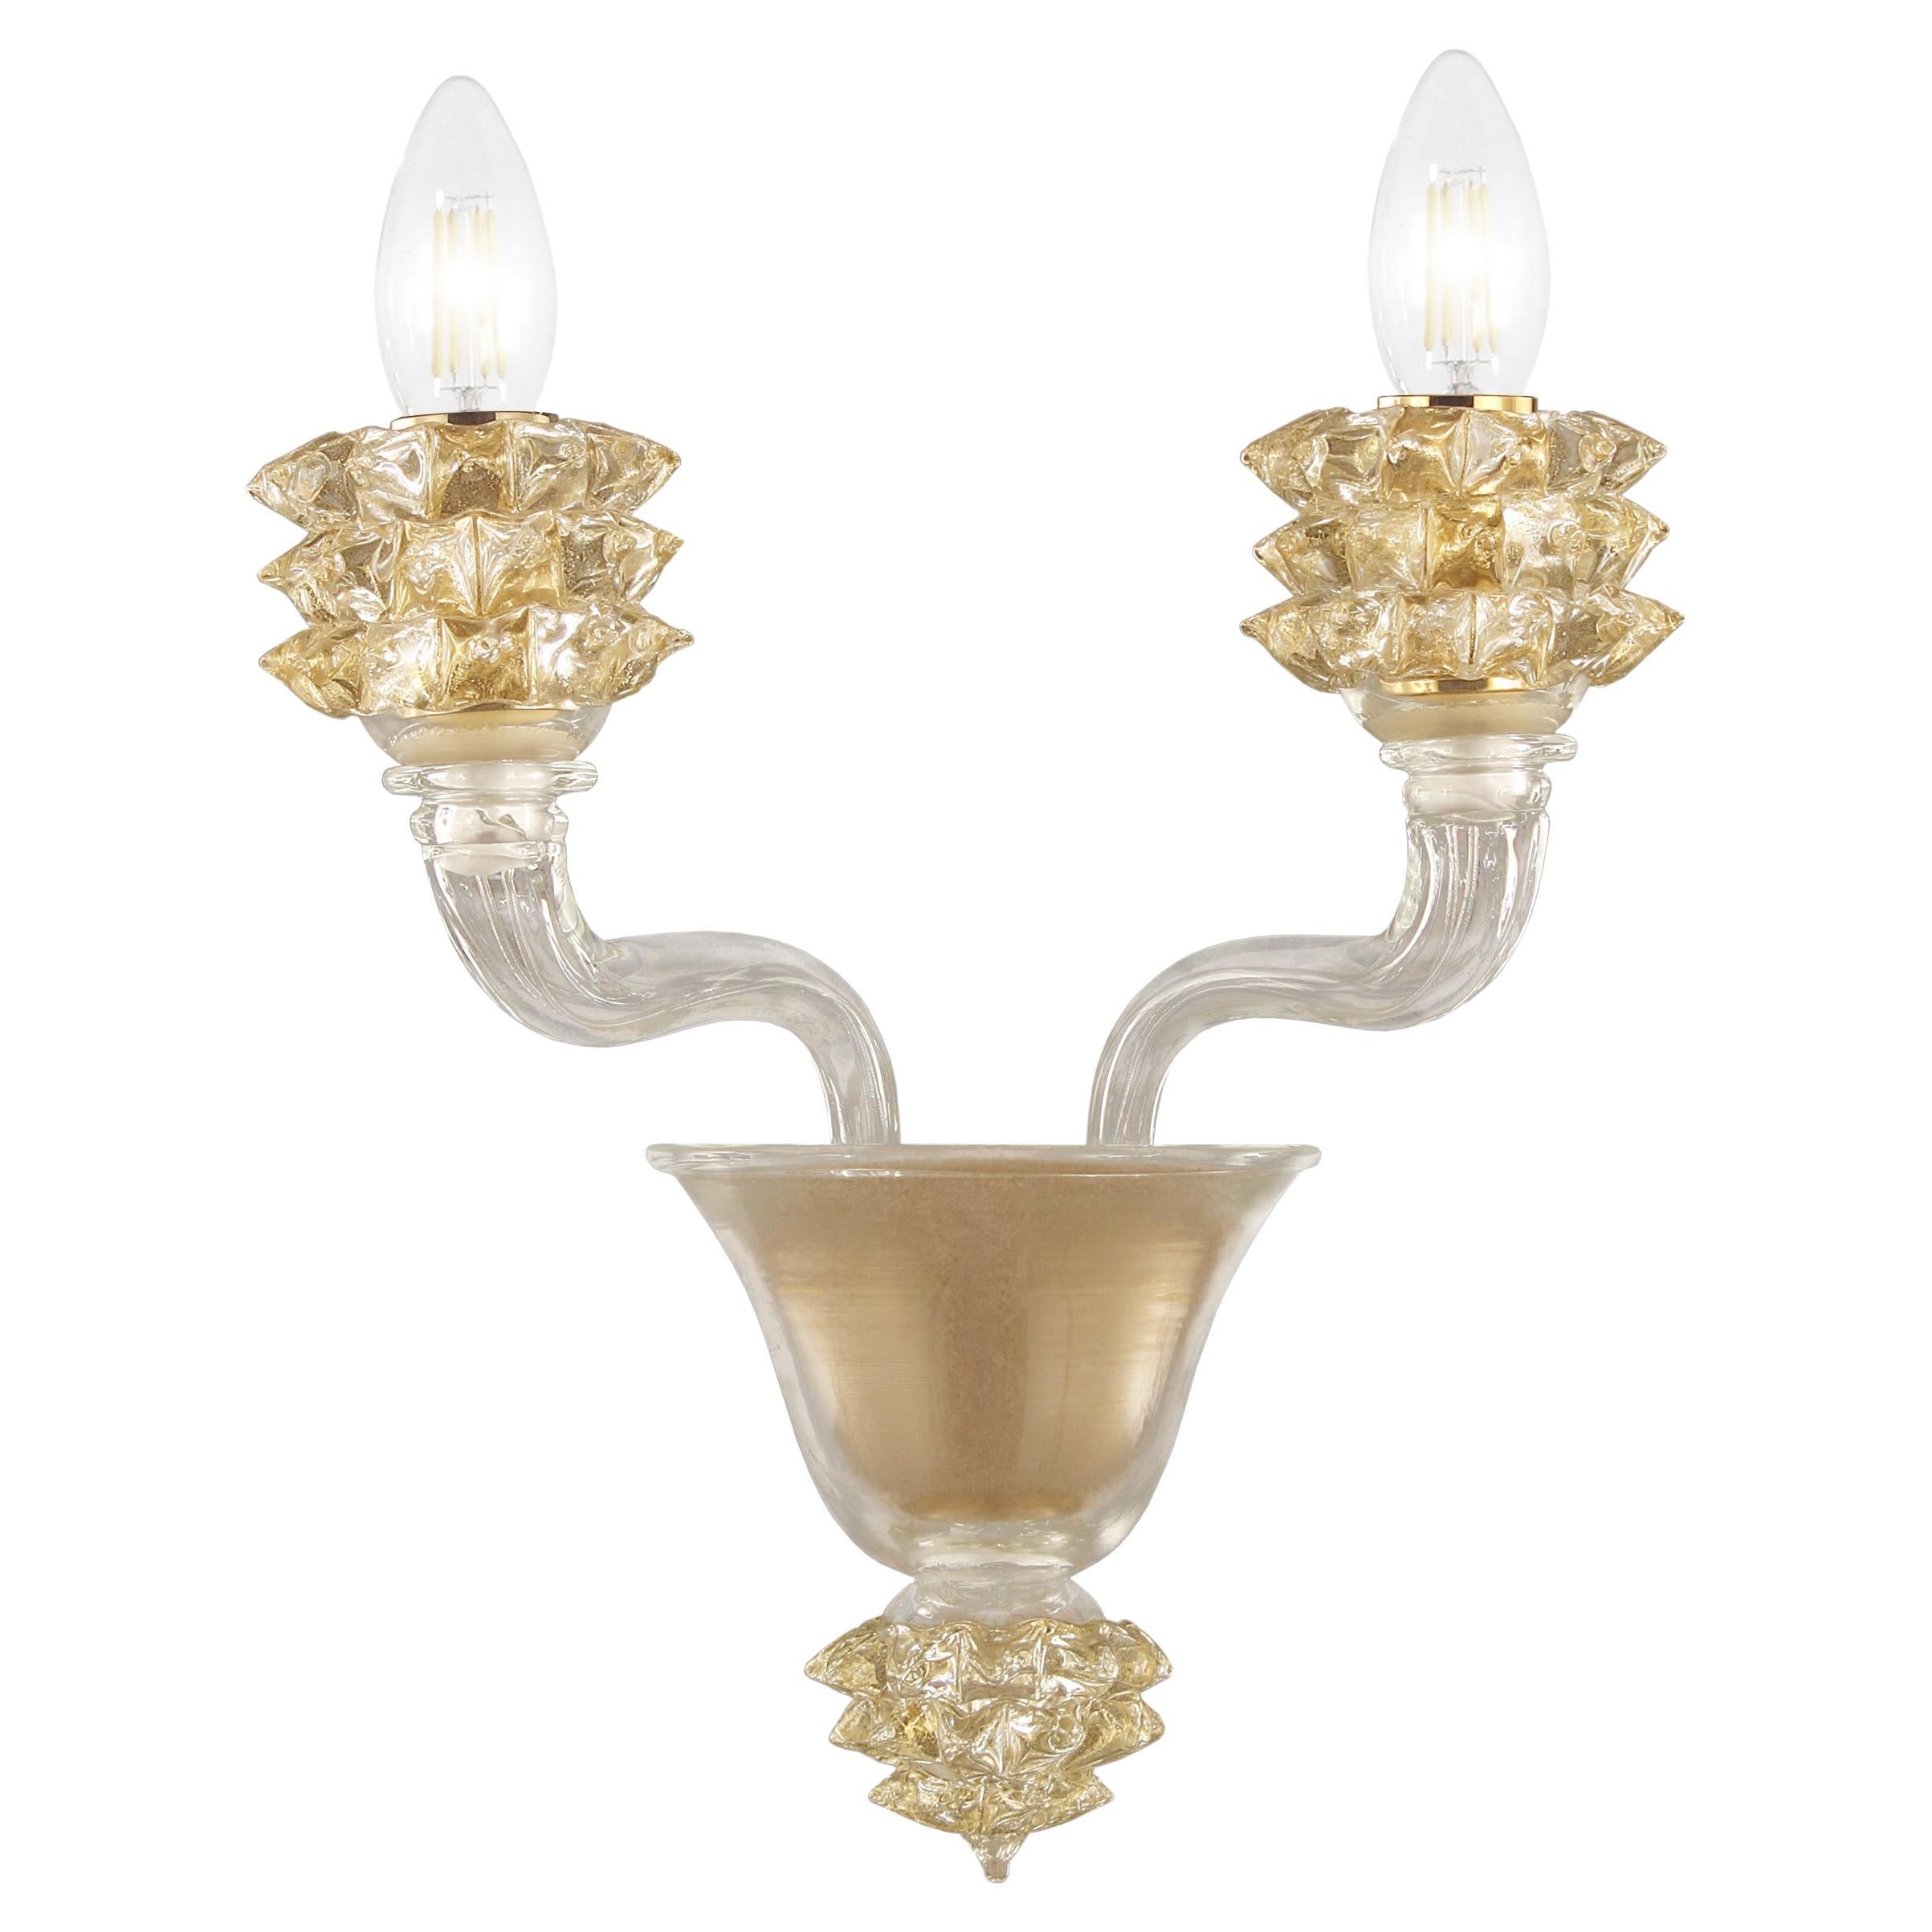 Sconce 2 Arms Clear Murano Glass Gold Rostri Details by Multiforme in Stock